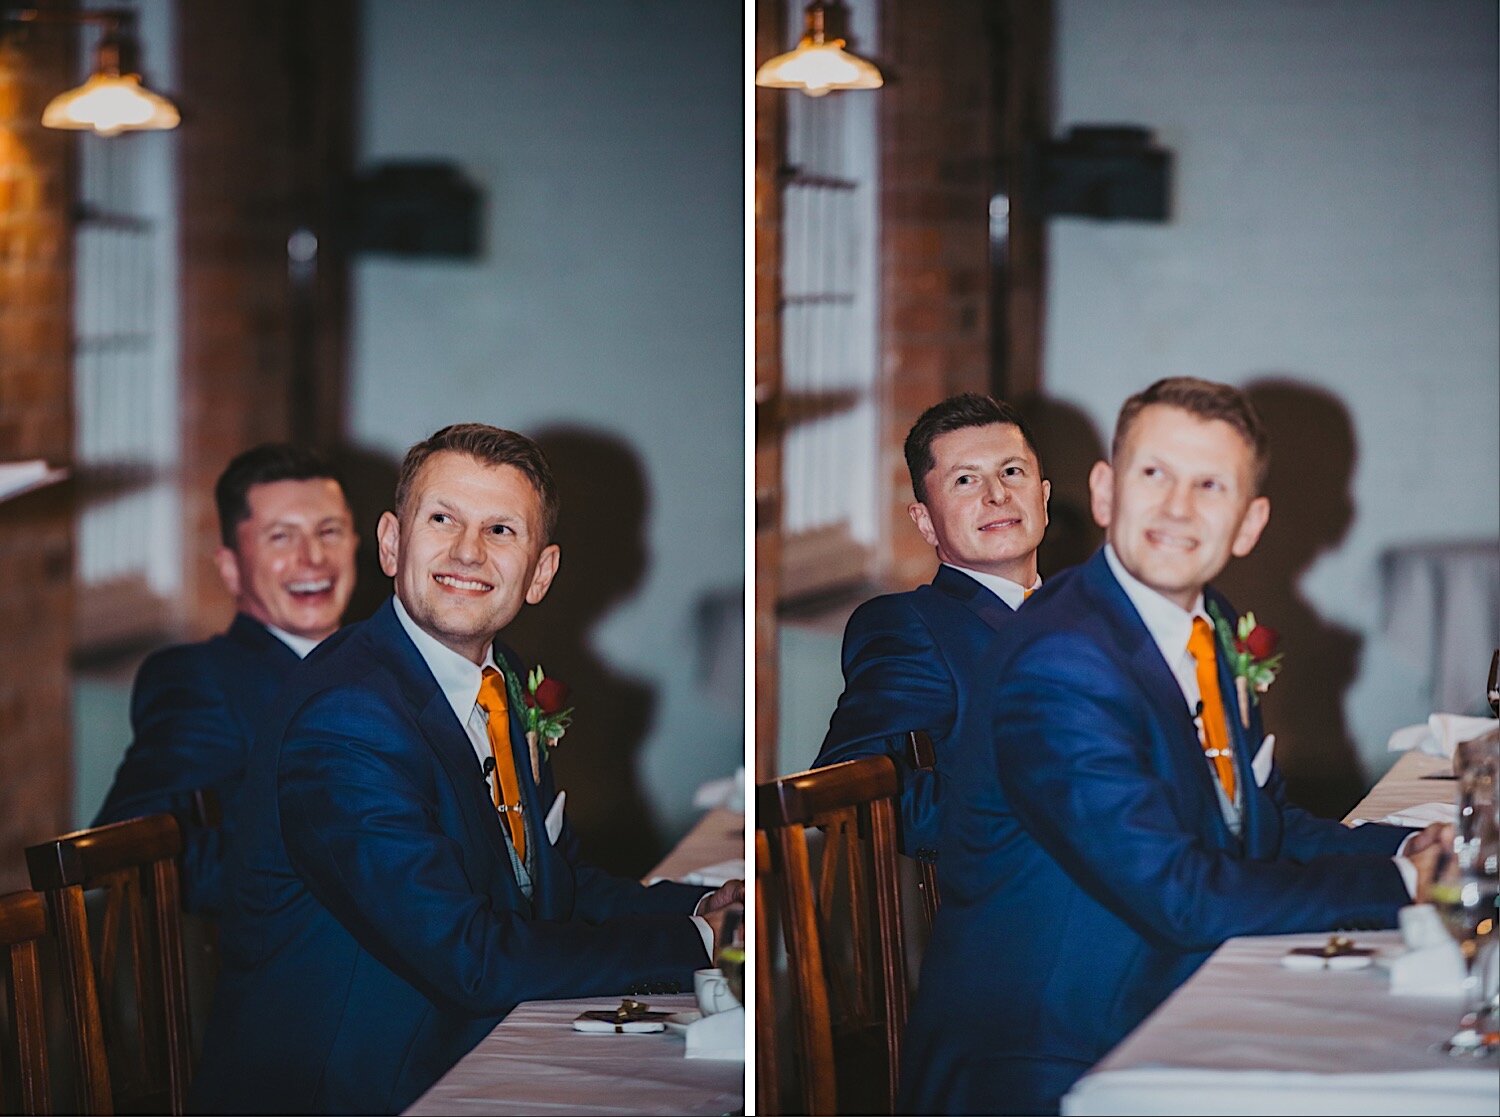 76_TWS-813_TWS-814_gay_photographer_venue_grooms_industrial_speeches_photography_derby_chic_westmill_wedding.jpg